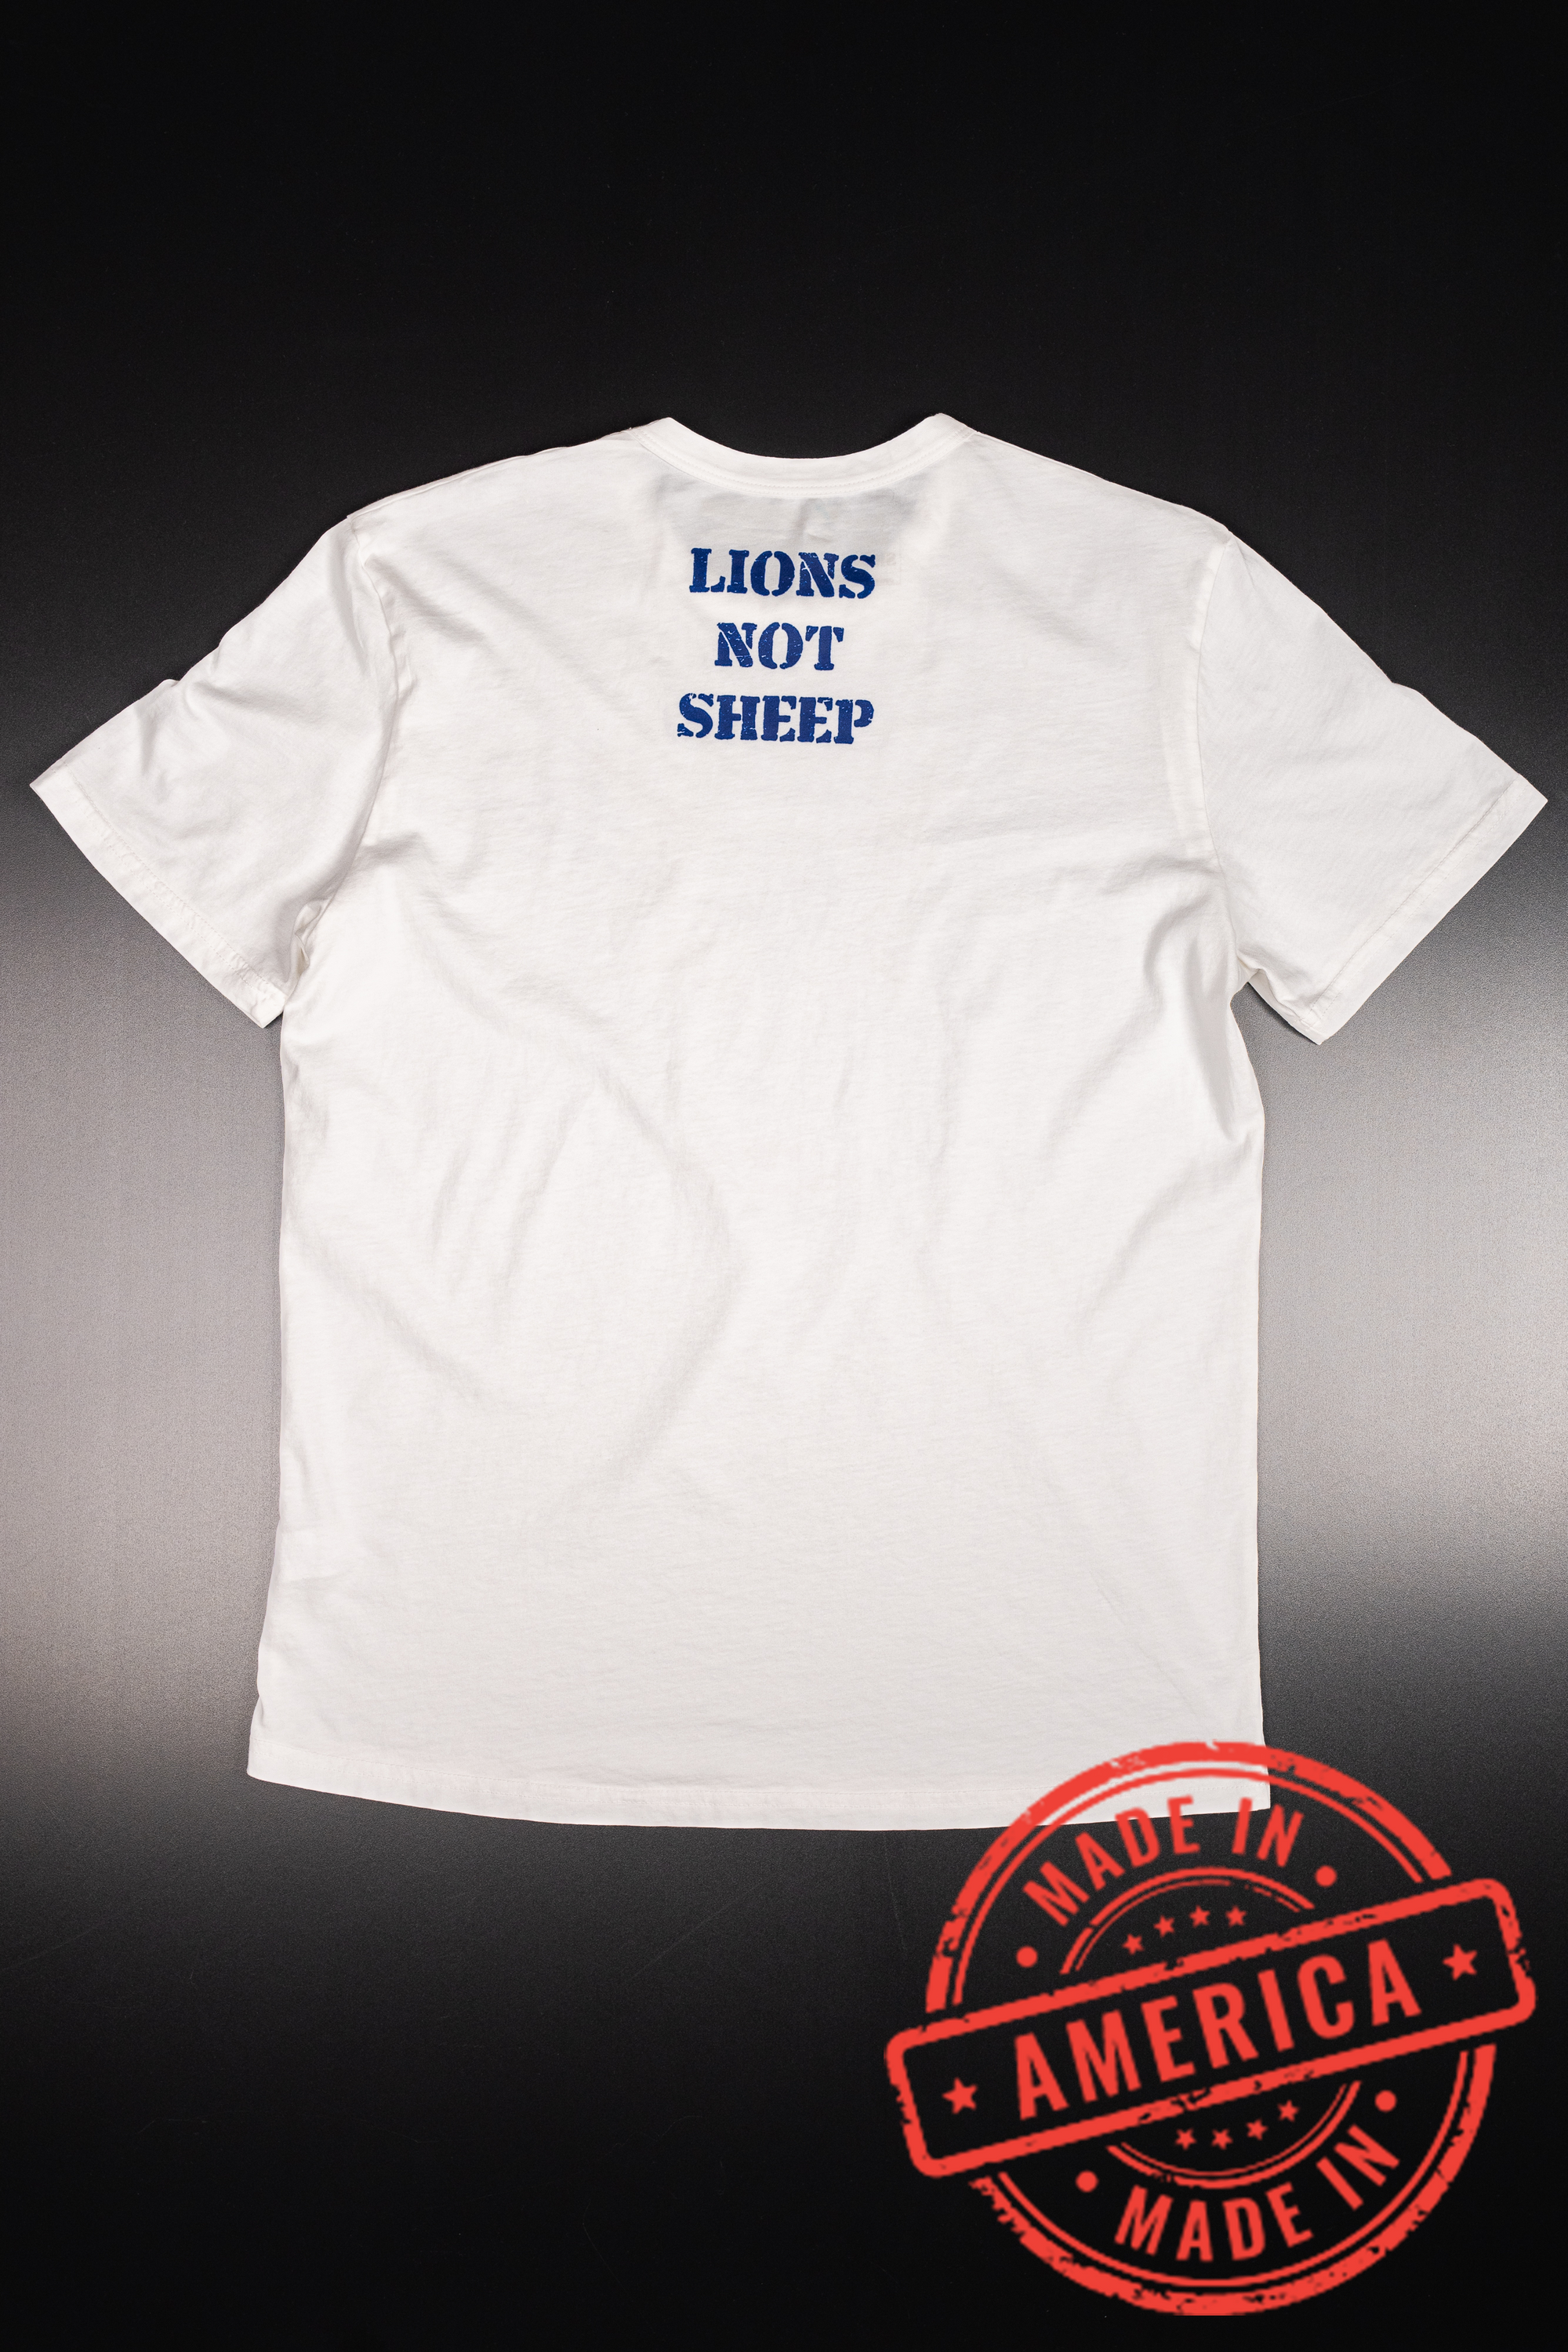 Lions Not Sheep "Defender of Liberty" Premium USA Tee 🇺🇸 - Lions Not Sheep ®